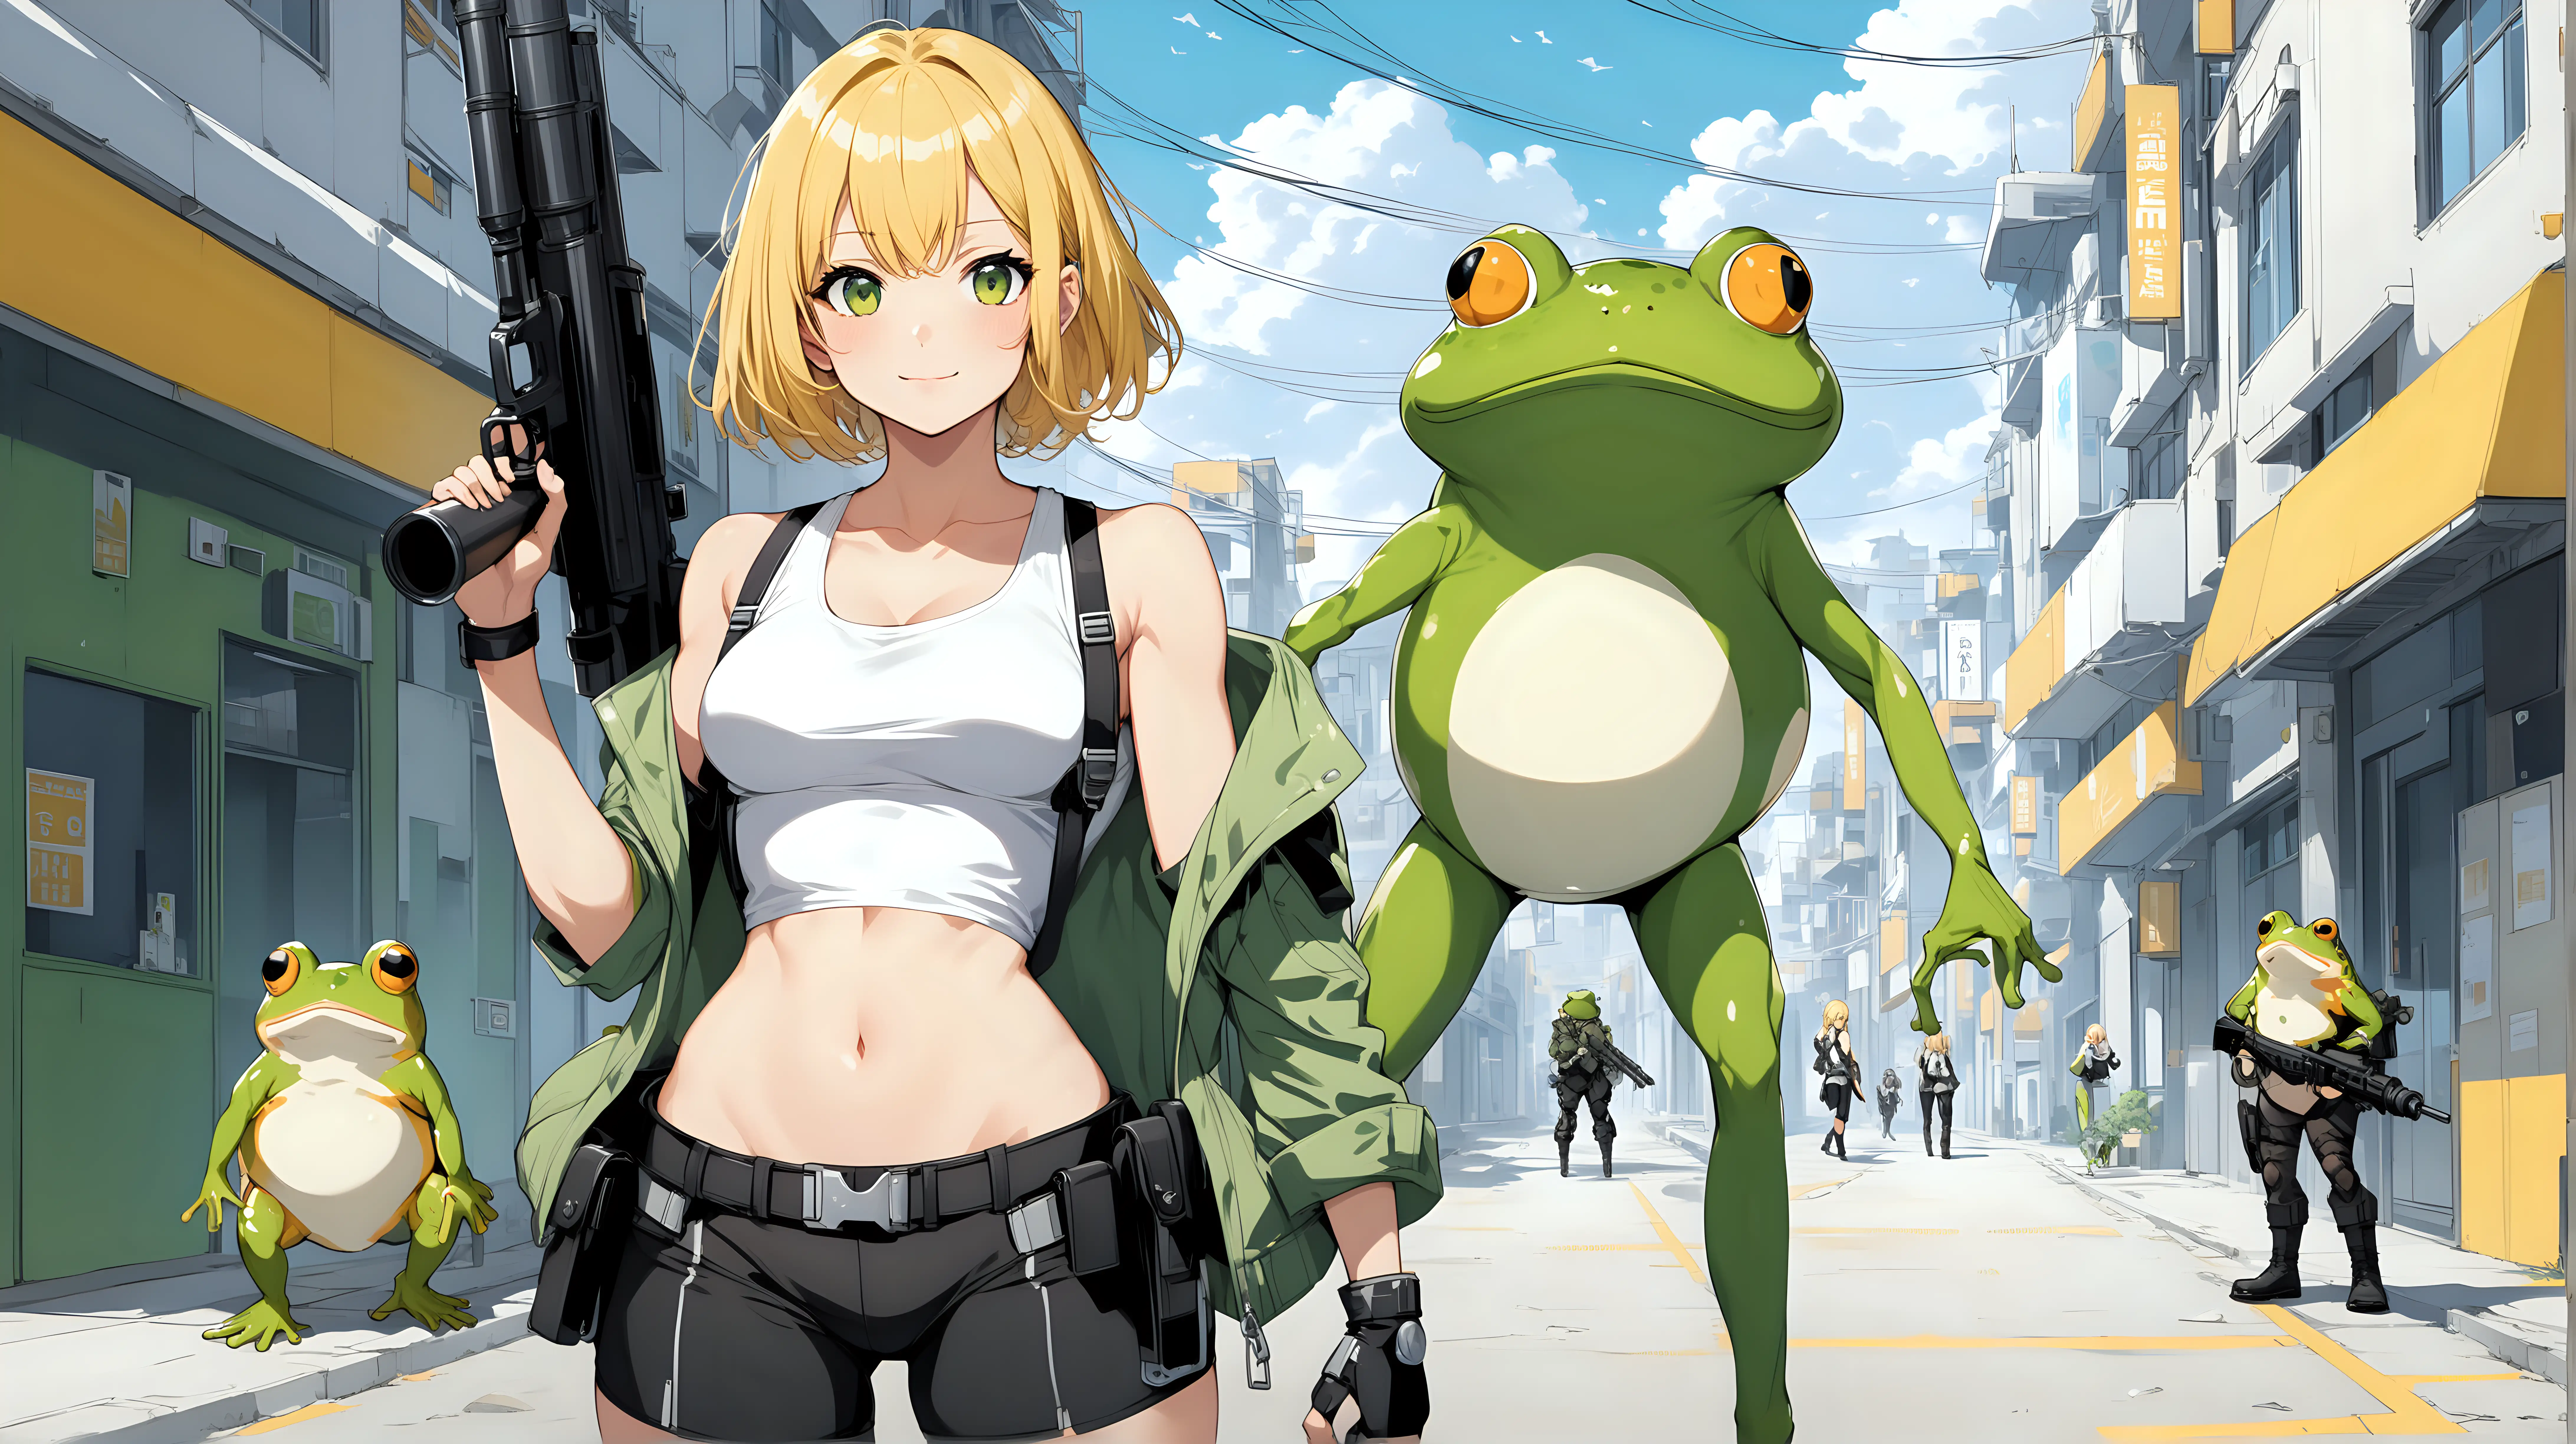 the first character is a sexy fit 24 year old hero girl, short chin length yellow hair, posing in a futuristic town, toned body, short white tank top, wearing suspenders, guns in holsters on each thigh, combat boots, the second character is a humanoid frog in a green jacket holding a bazooka, grenades hanging on his jacket, standing next to her, yellow black white 3 color minimal design,